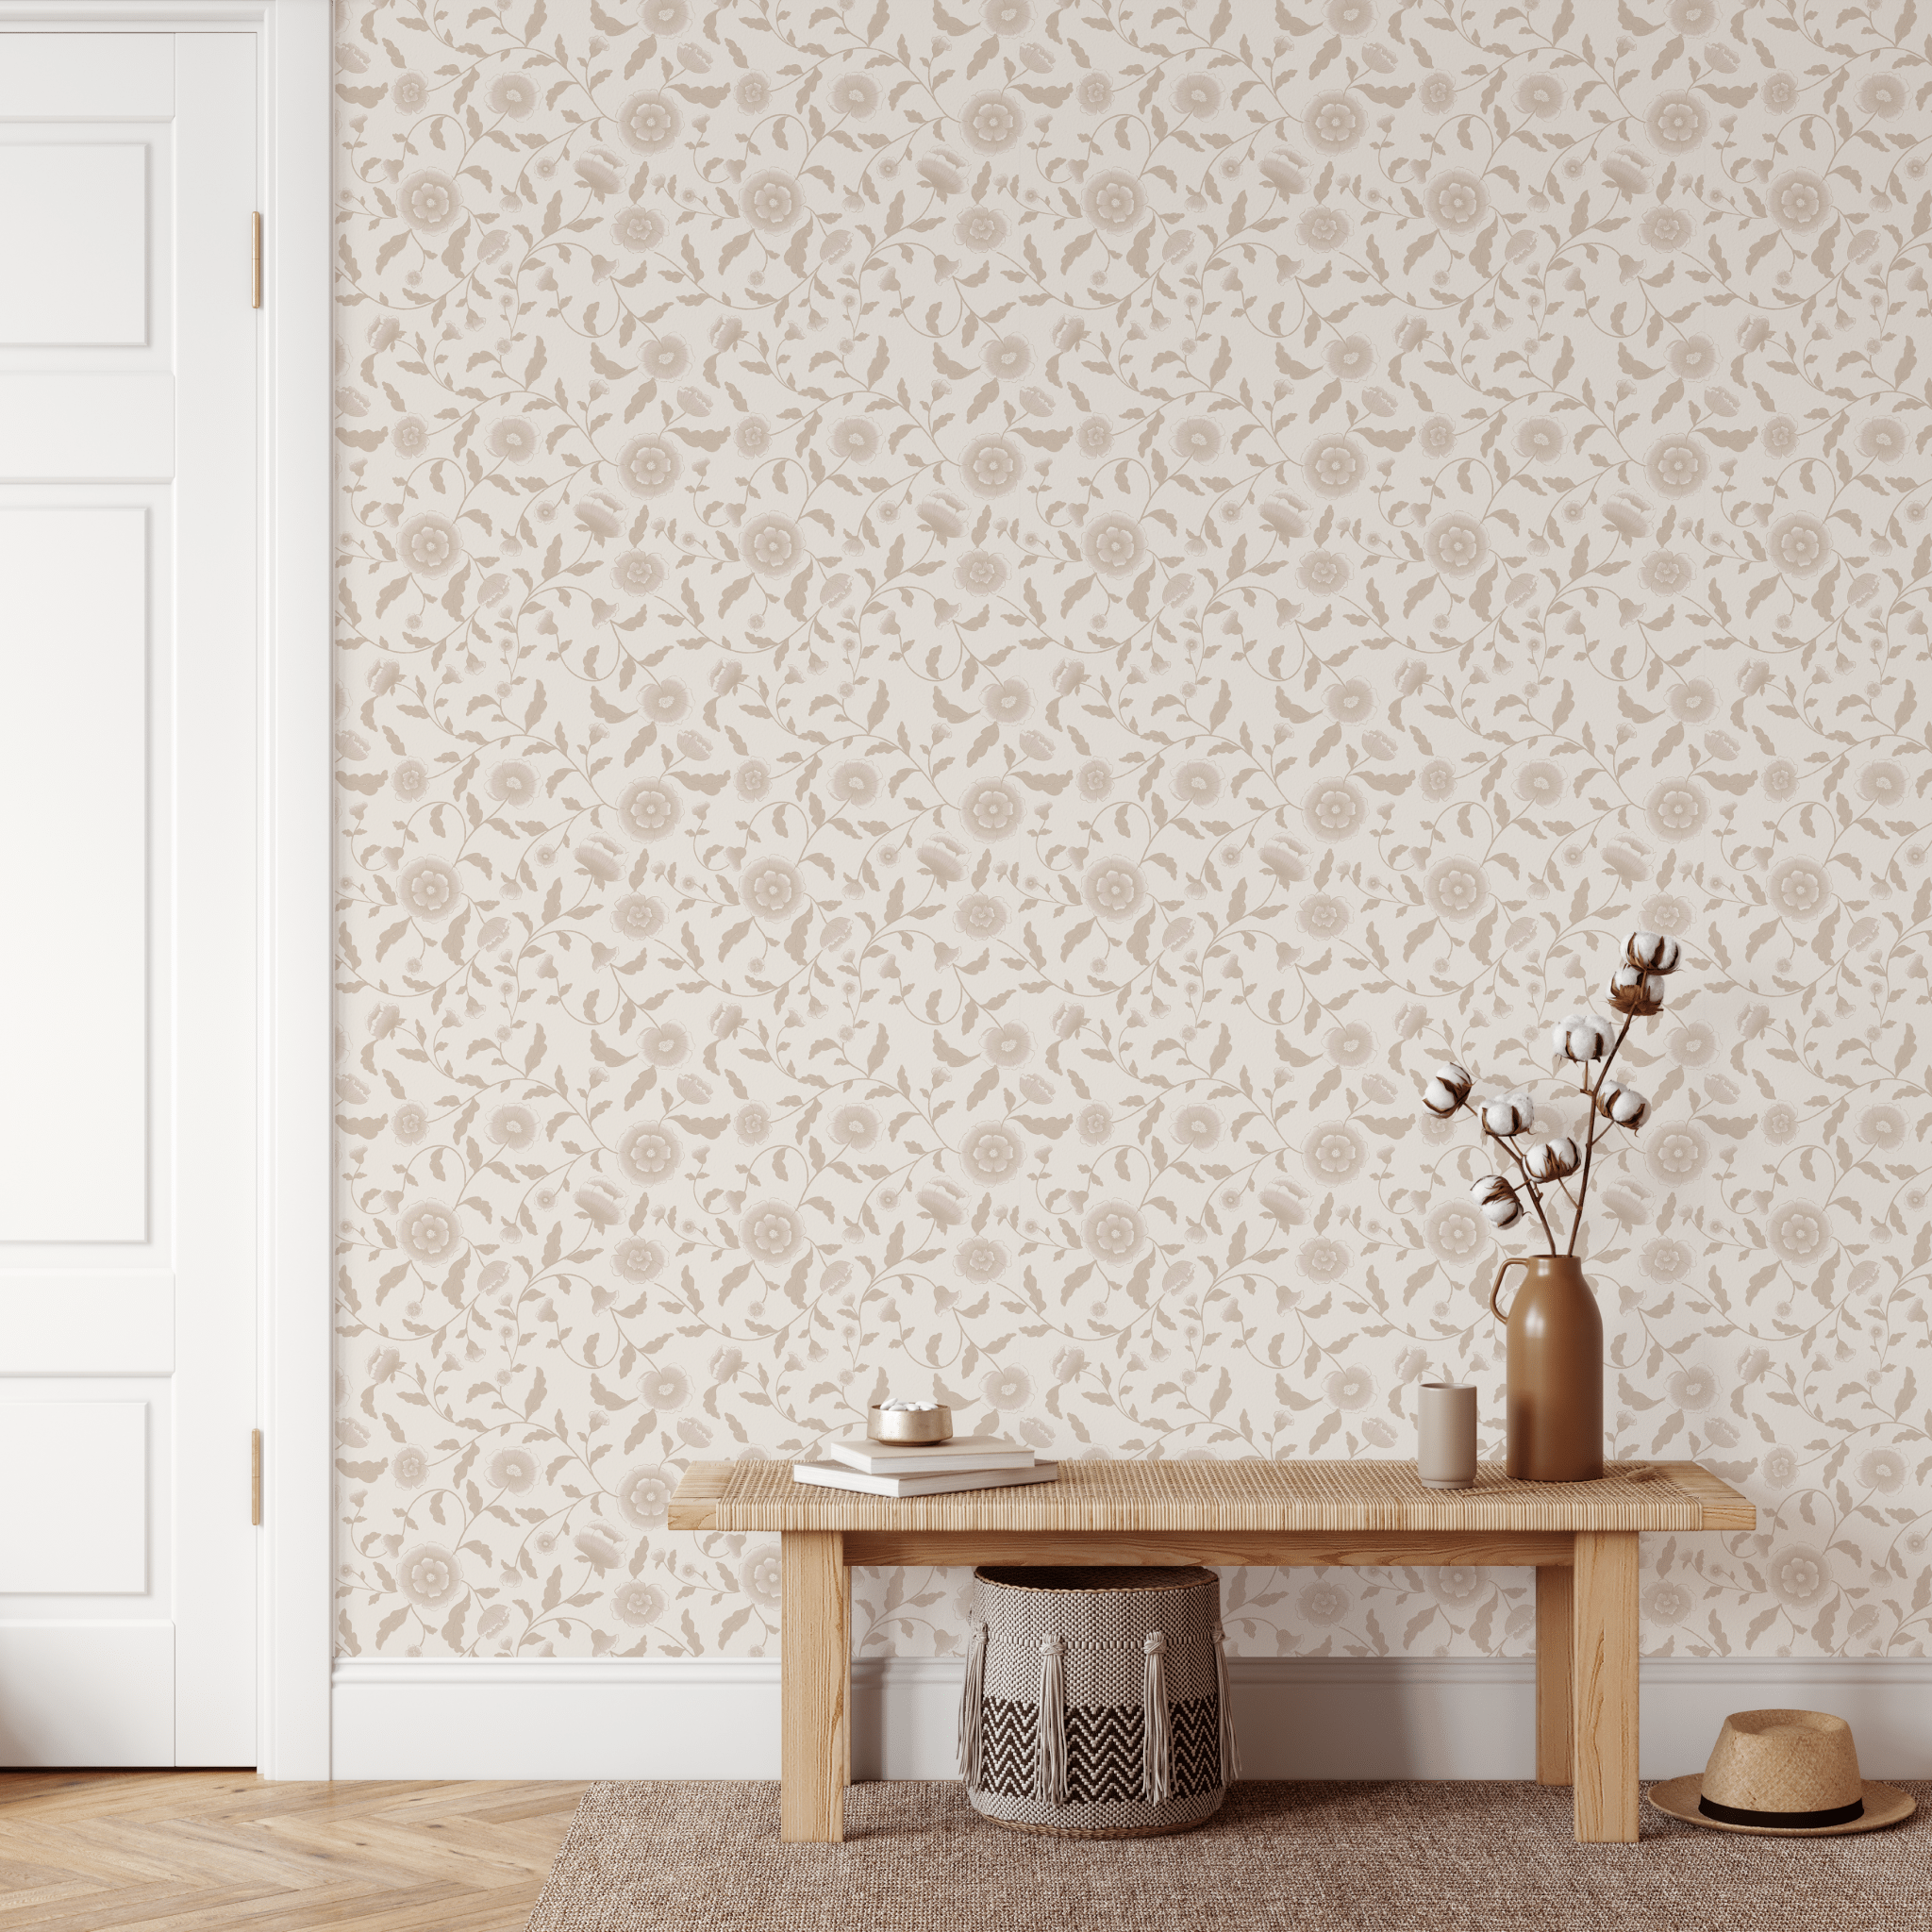 Neutral home decor with faded blush floral peel and stick wallpaper, adding a romantic touch with its soft floral pattern.